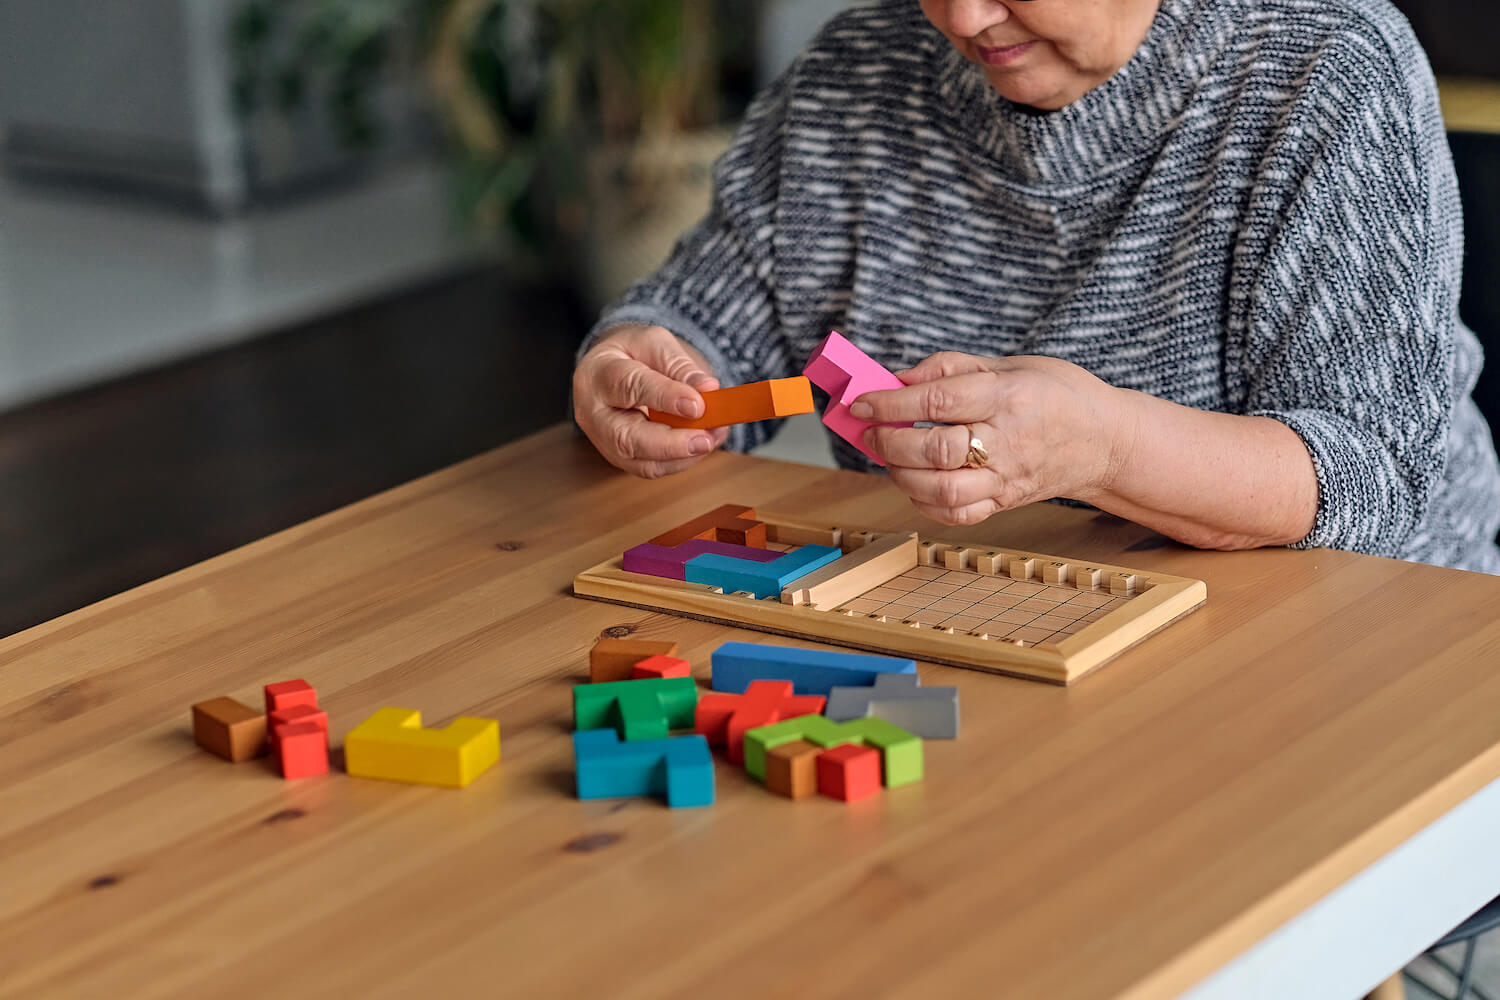 A senior resident solving a wooden shape puzzle